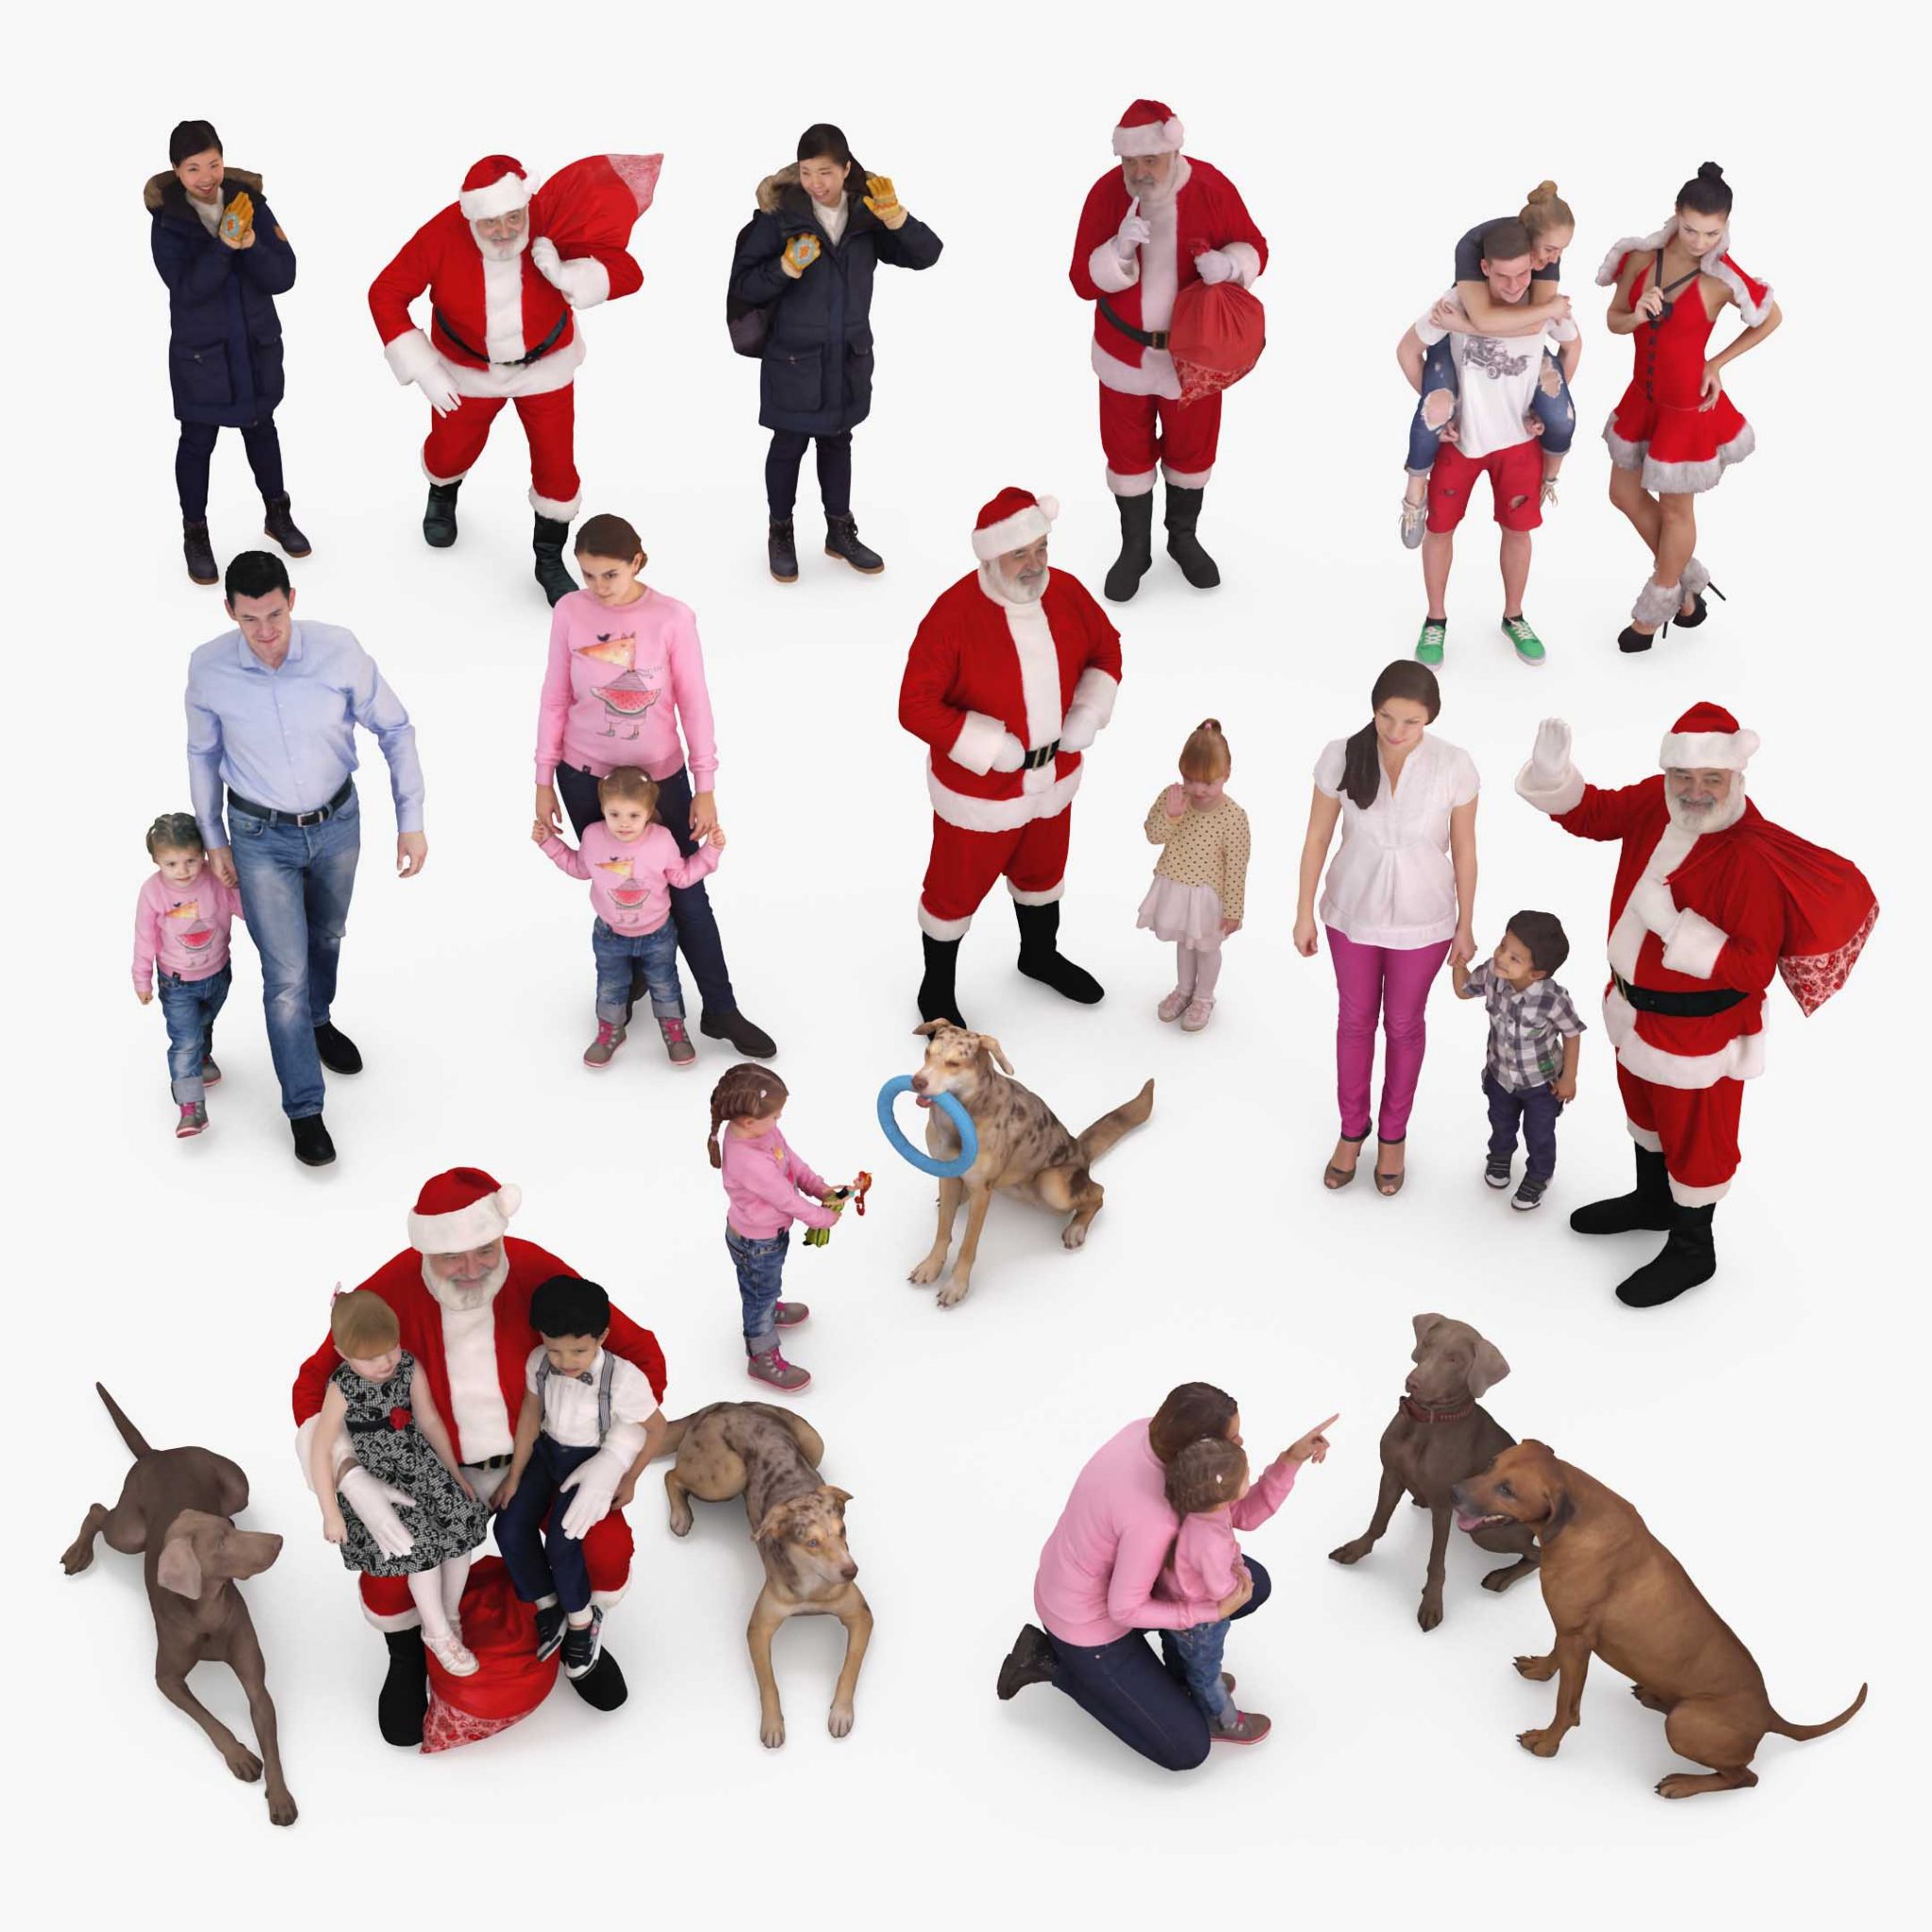 Holiday People x20 3D Models | powered by 3D Scanning Studio 3DTree